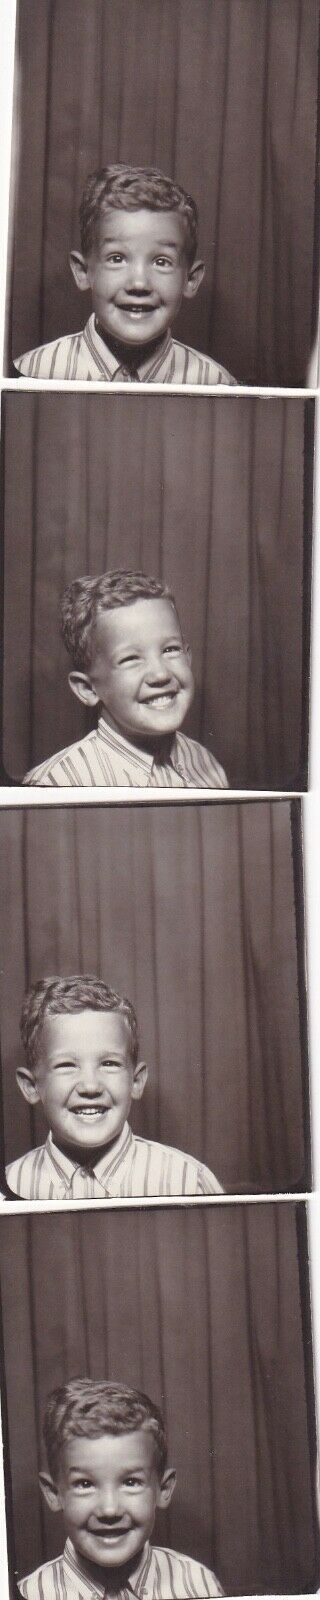 Vintage Photo Booth - Strip - Adorable Little Boy,  Making Faces,  Wide Eyes